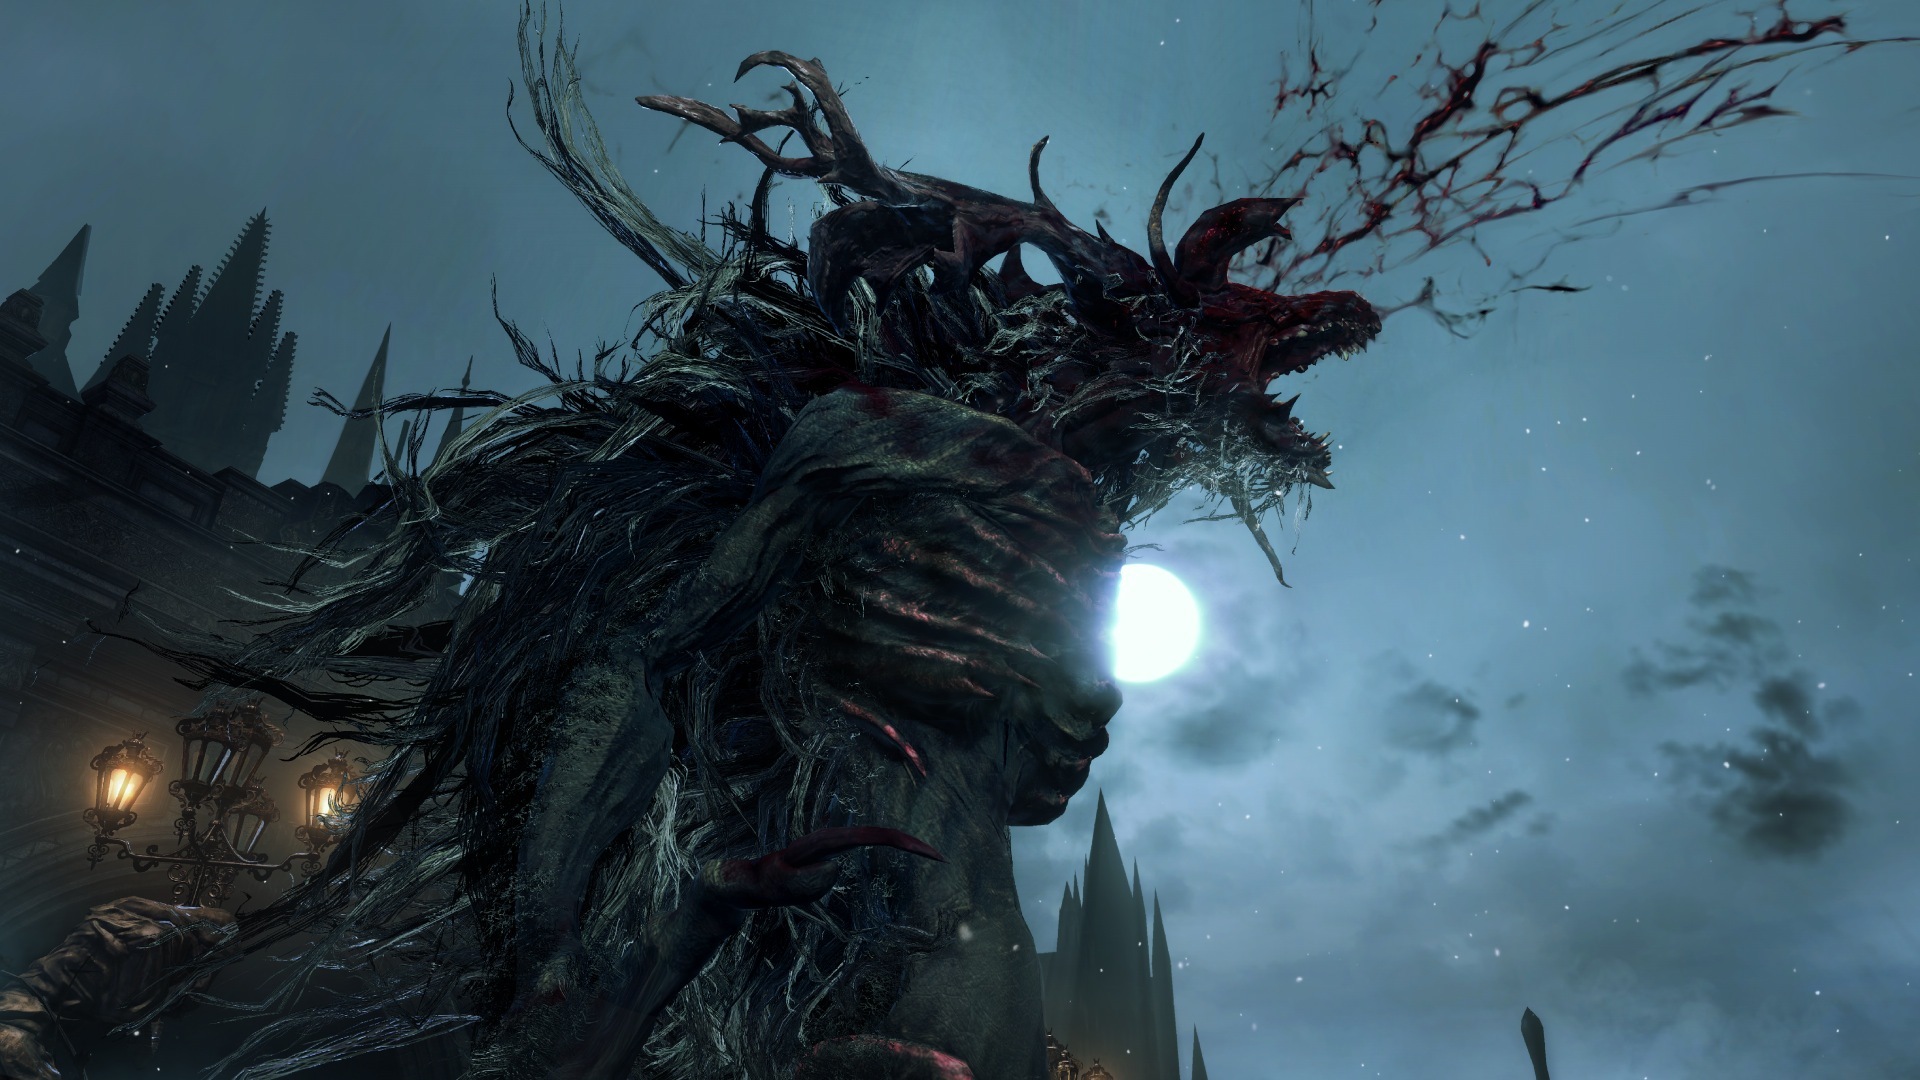 Multiple PlayStation Exclusives Coming to PC But Not Bloodborne, Says  Insider